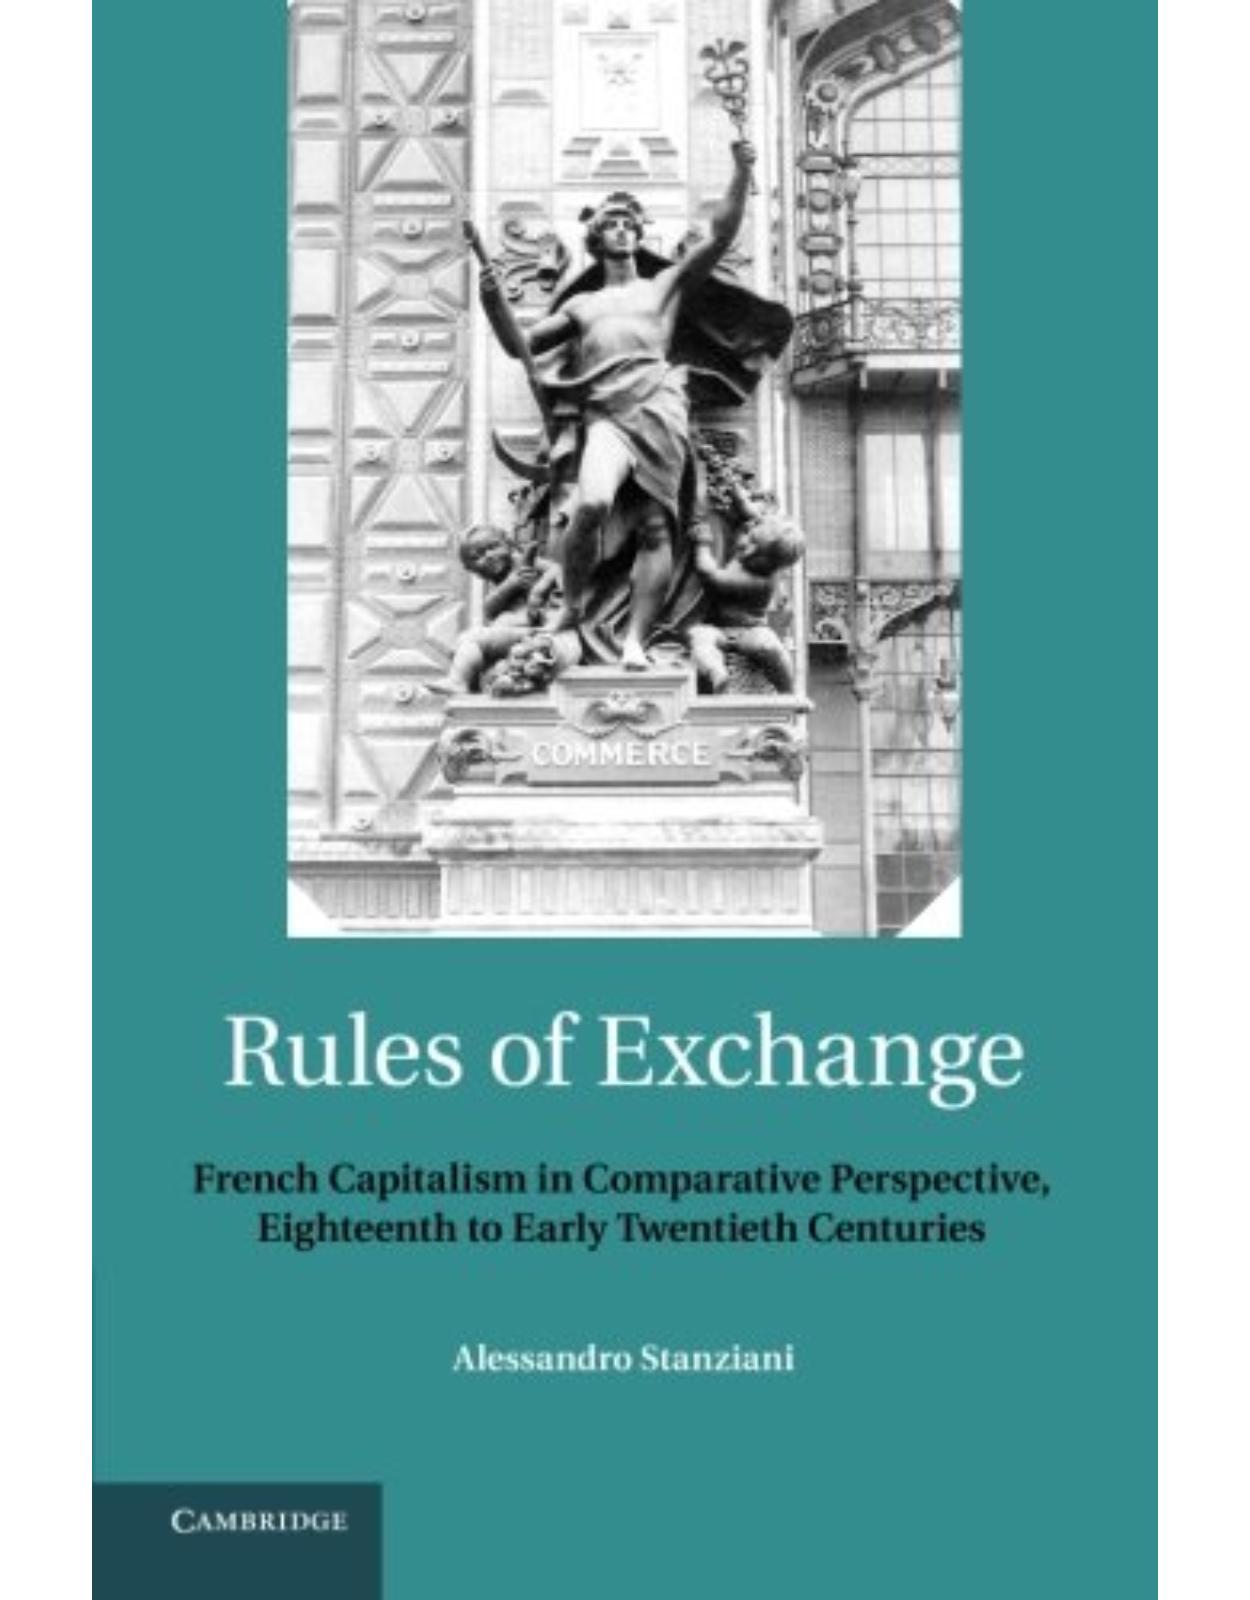 Rules of Exchange: French Capitalism in Comparative Perspective, Eighteenth to Early Twentieth Centuries